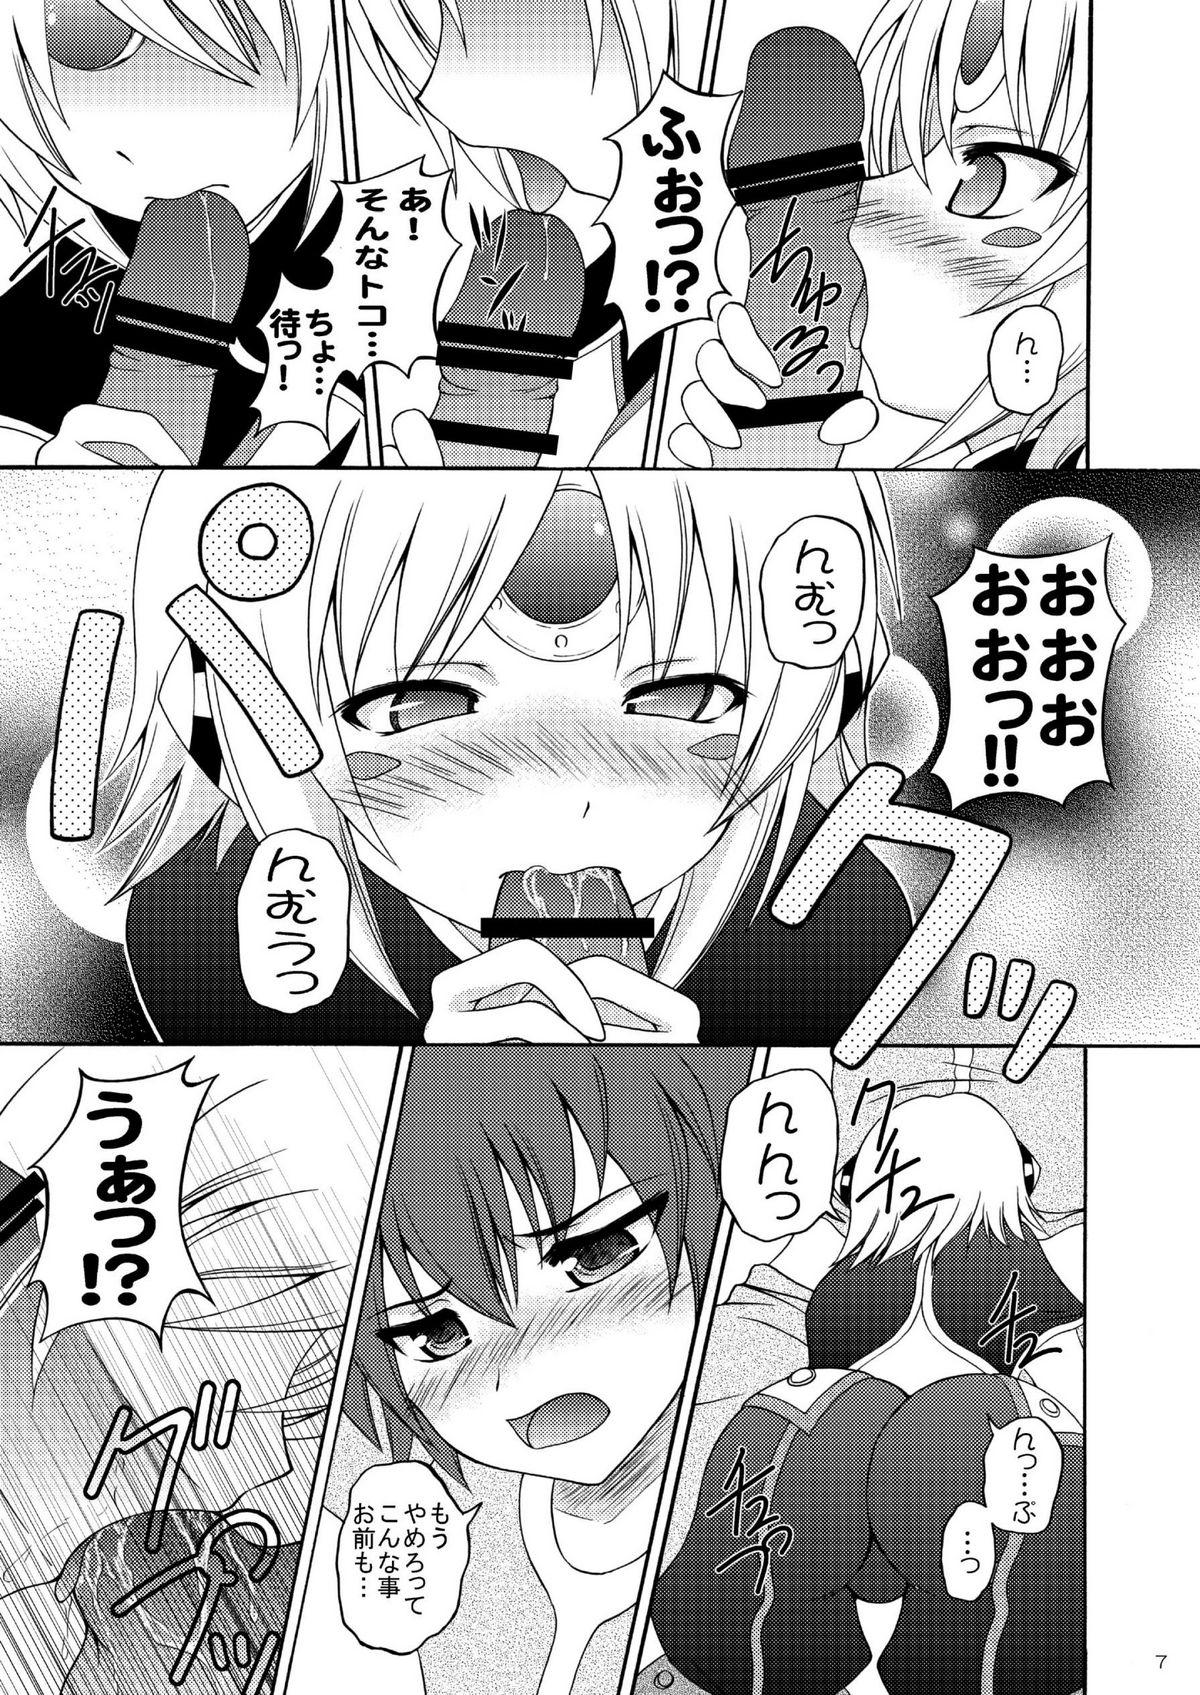 Masseuse E - Elsword Russian - Page 7